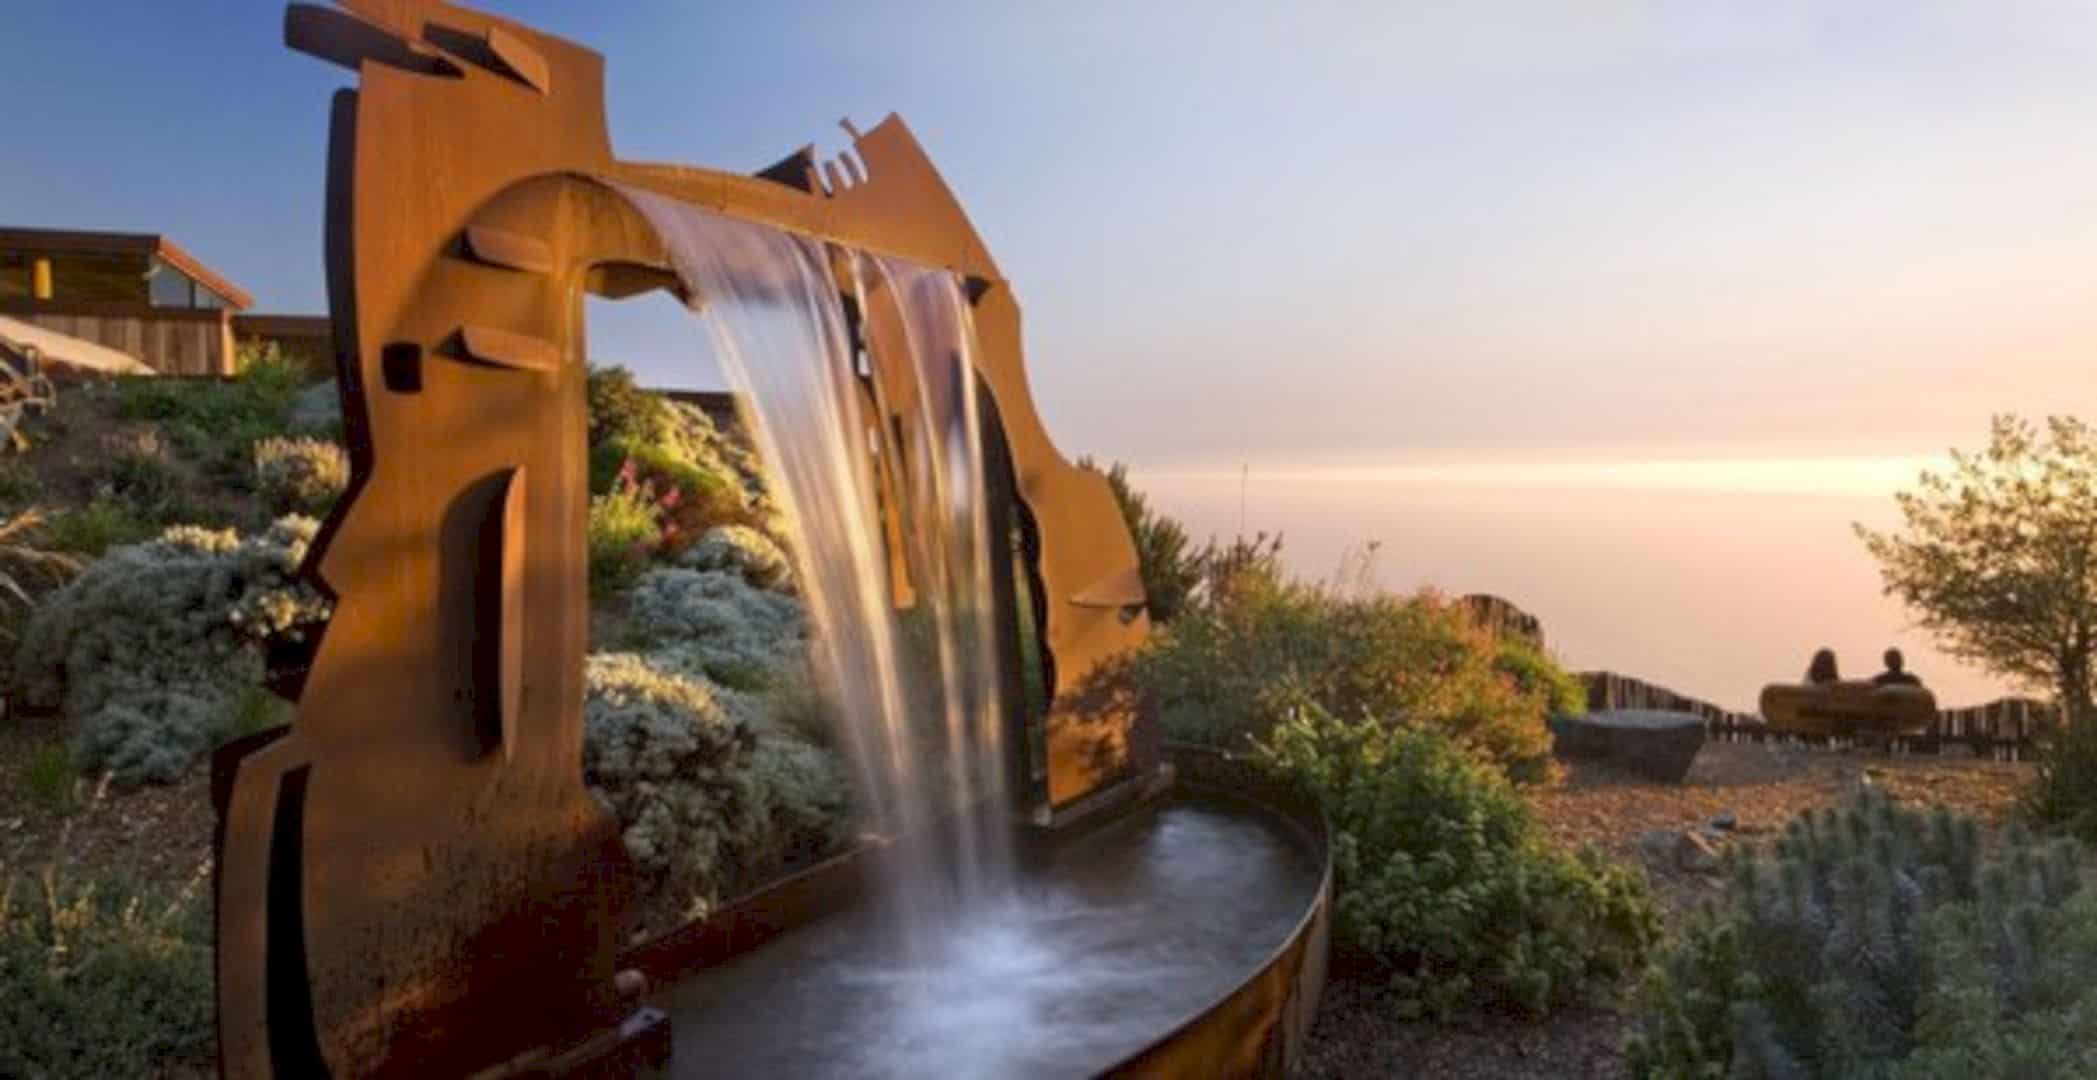 The Post Ranch Inn A Rustic Eco Luxury Hotel Overlooks The Pacific 2